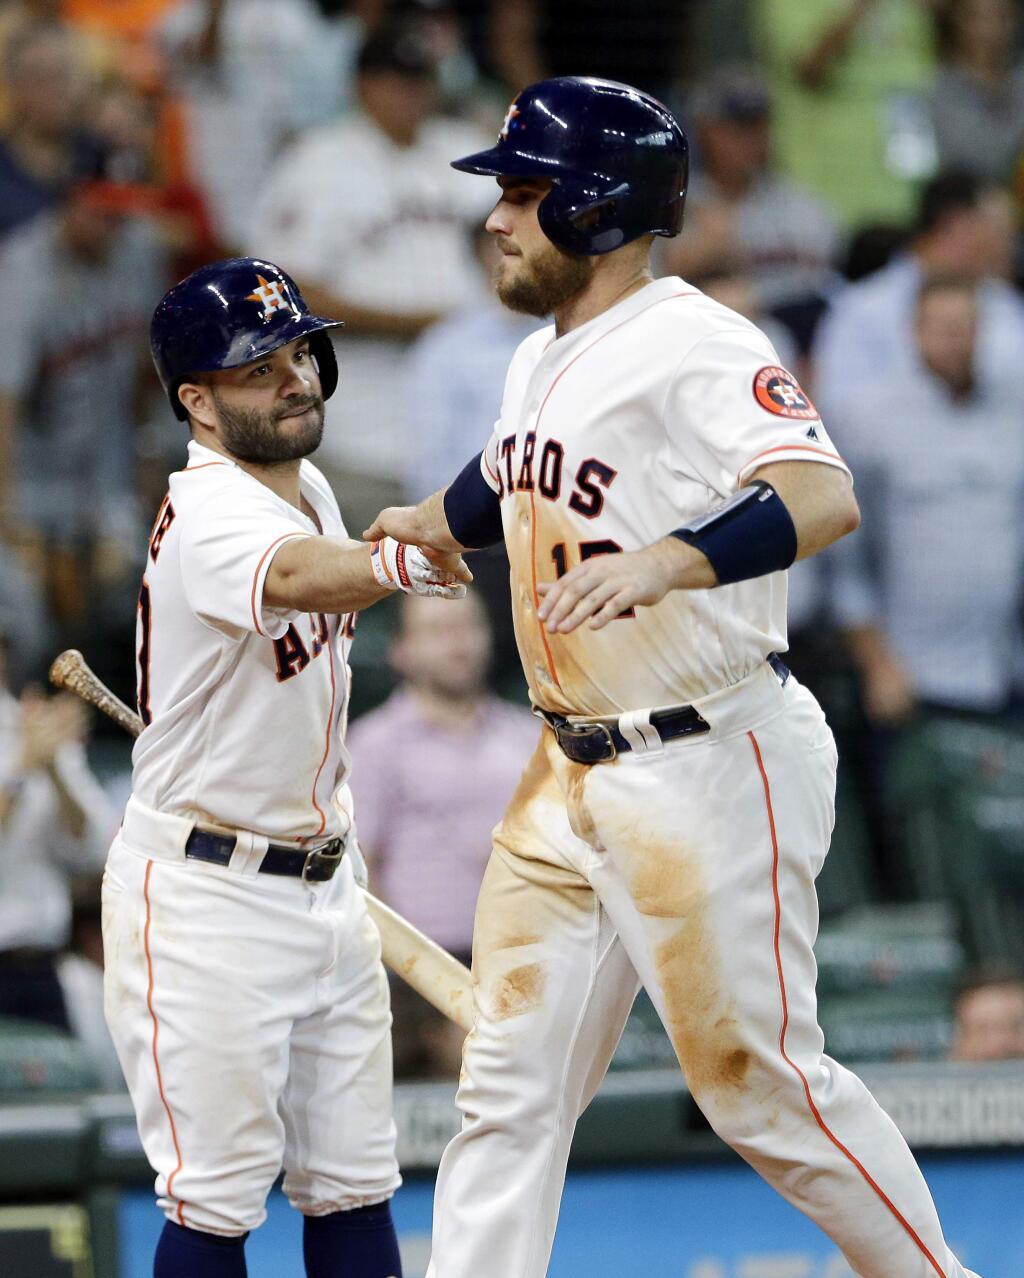 Houston Astros' Jose Altuve, left, congratulates Max Stassi (12) after he scores the go ahead run on the single by George Springer, making the score 4-3 during the fourth inning of a baseball game against the Oakland Athletics Wednesday, Aug. 29, 2018, in Houston. (AP Photo/Michael Wyke)